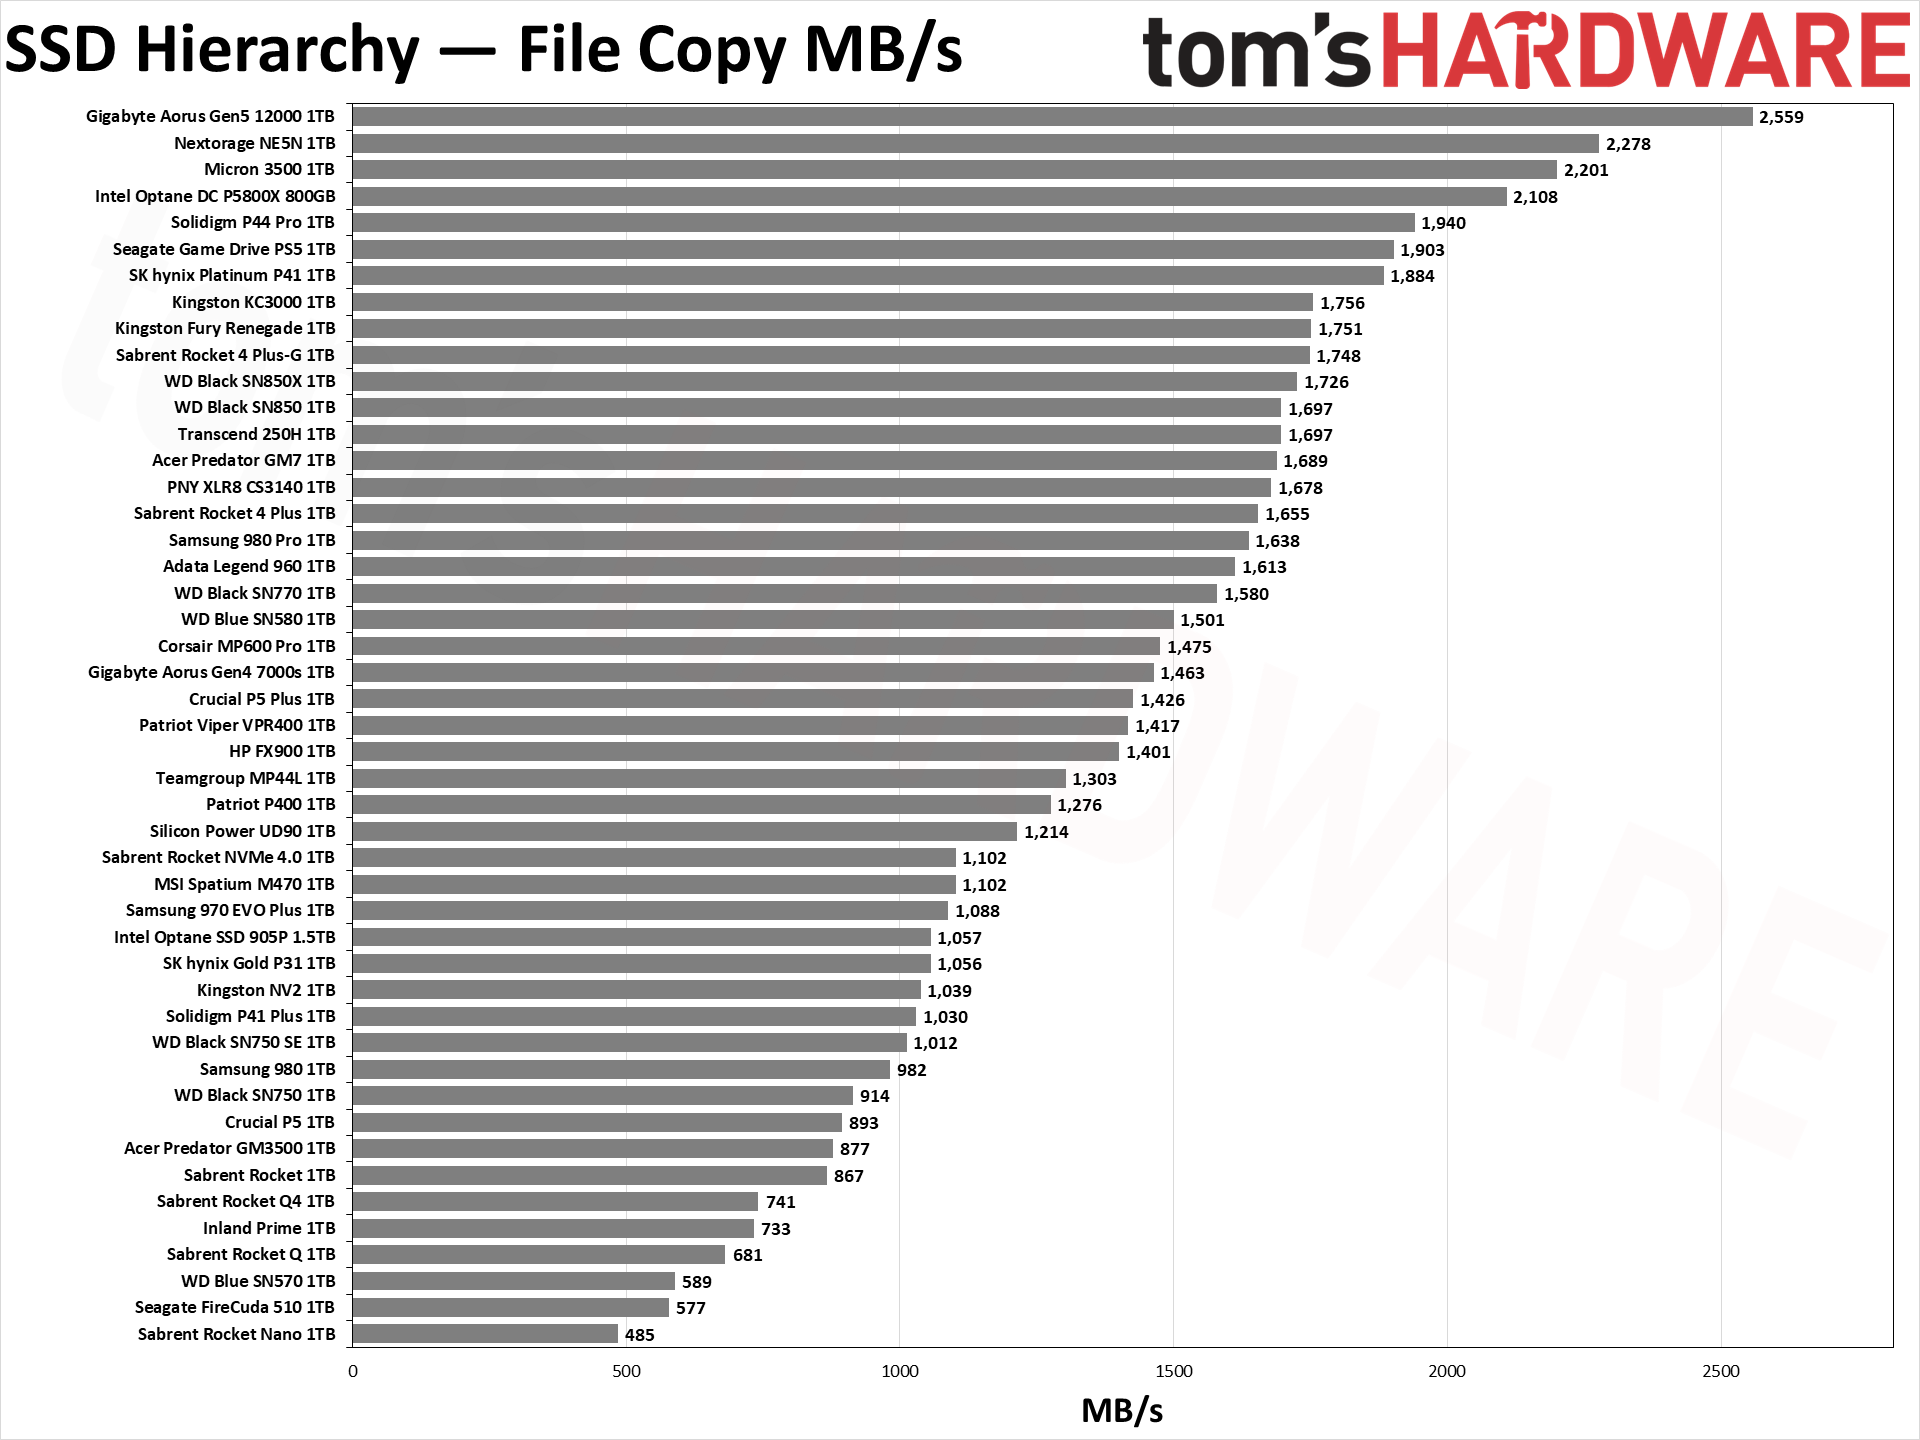 SSD Benchmarks Hierarchy performance charts